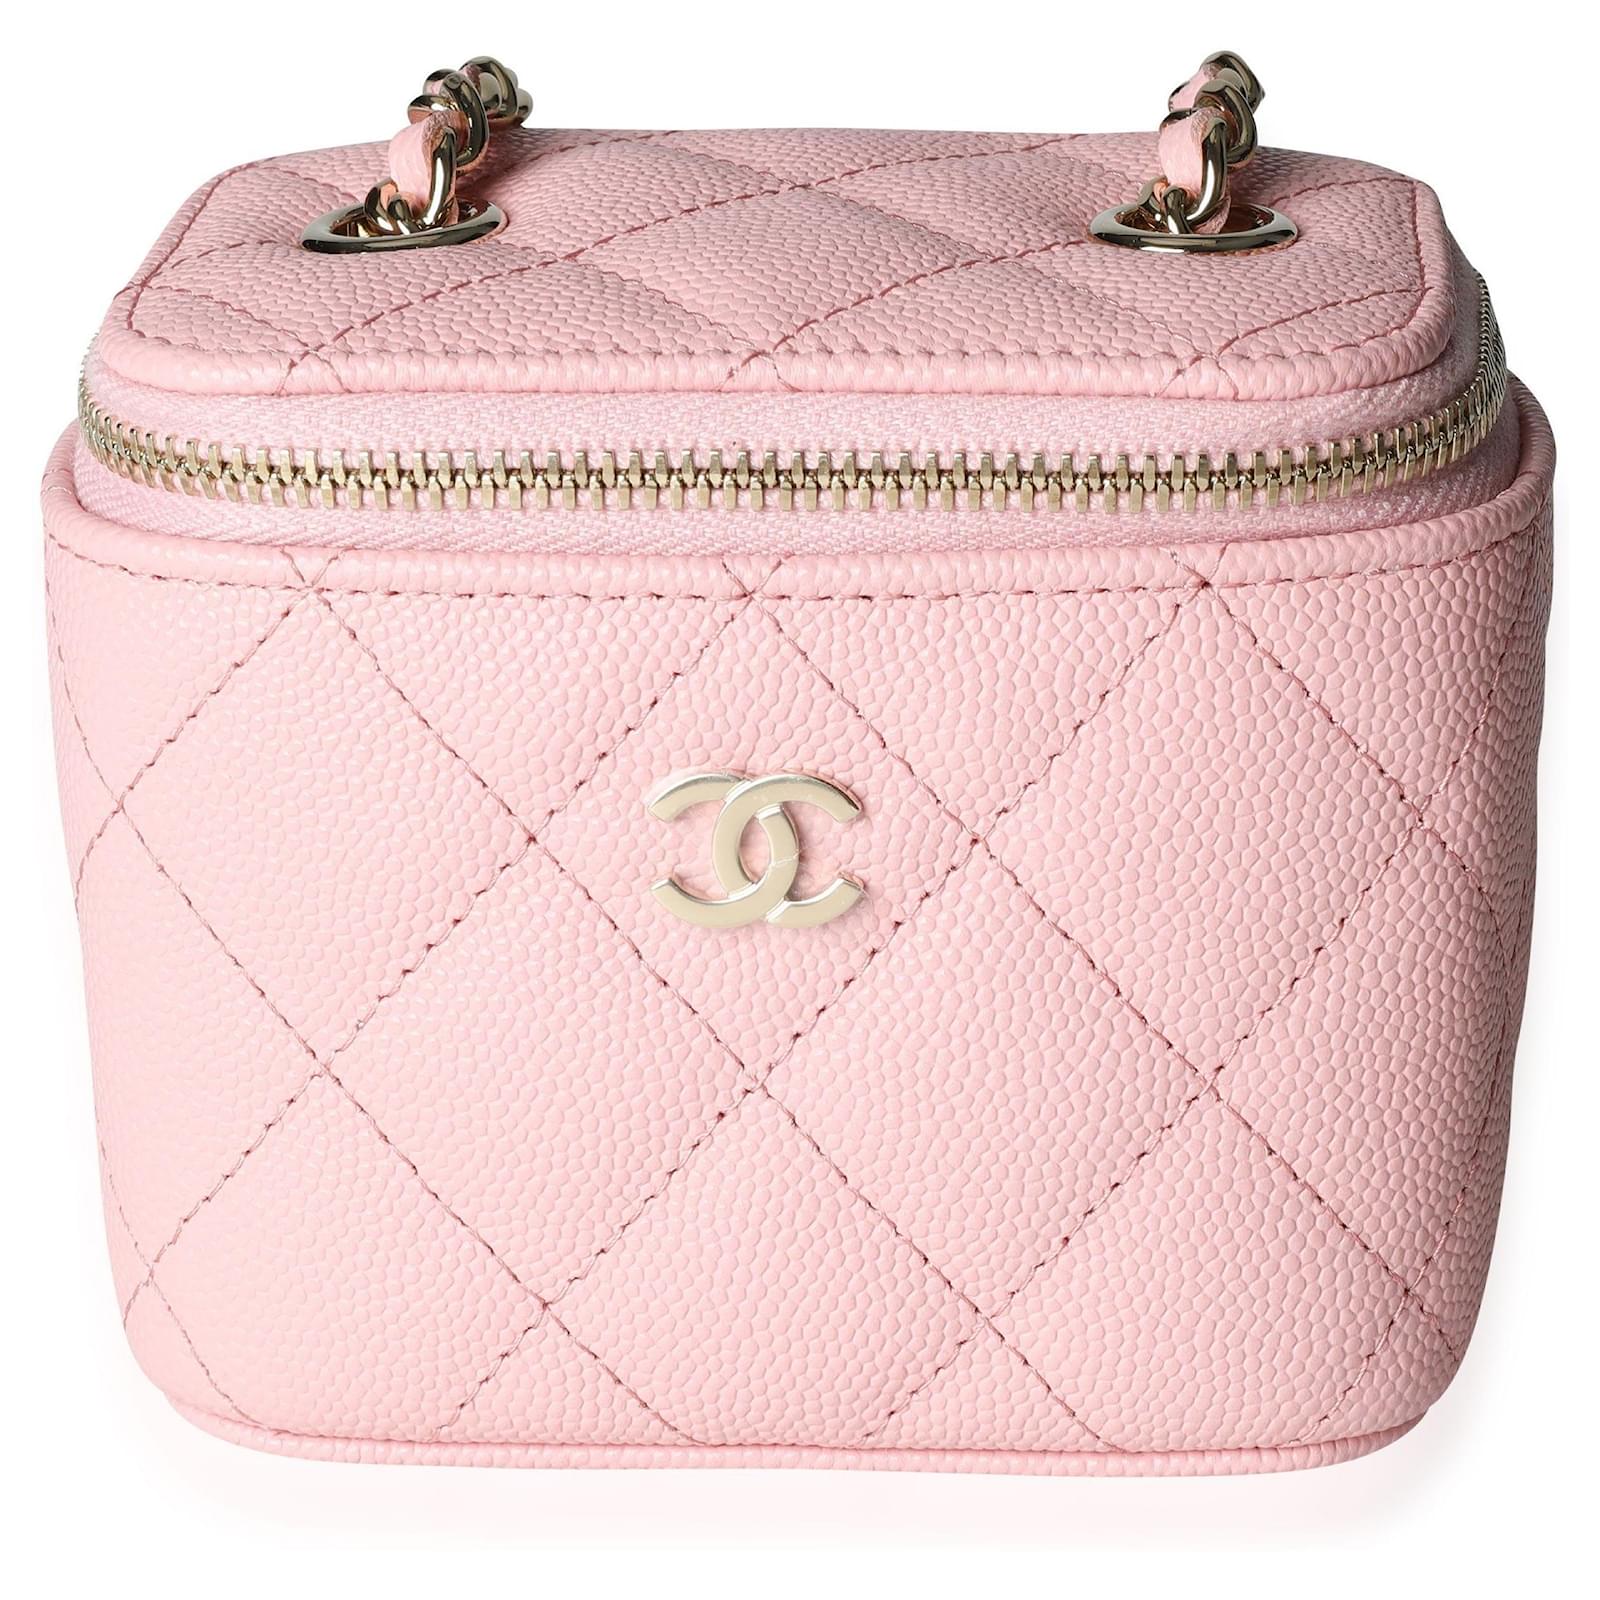 chanel classic vanity pouch